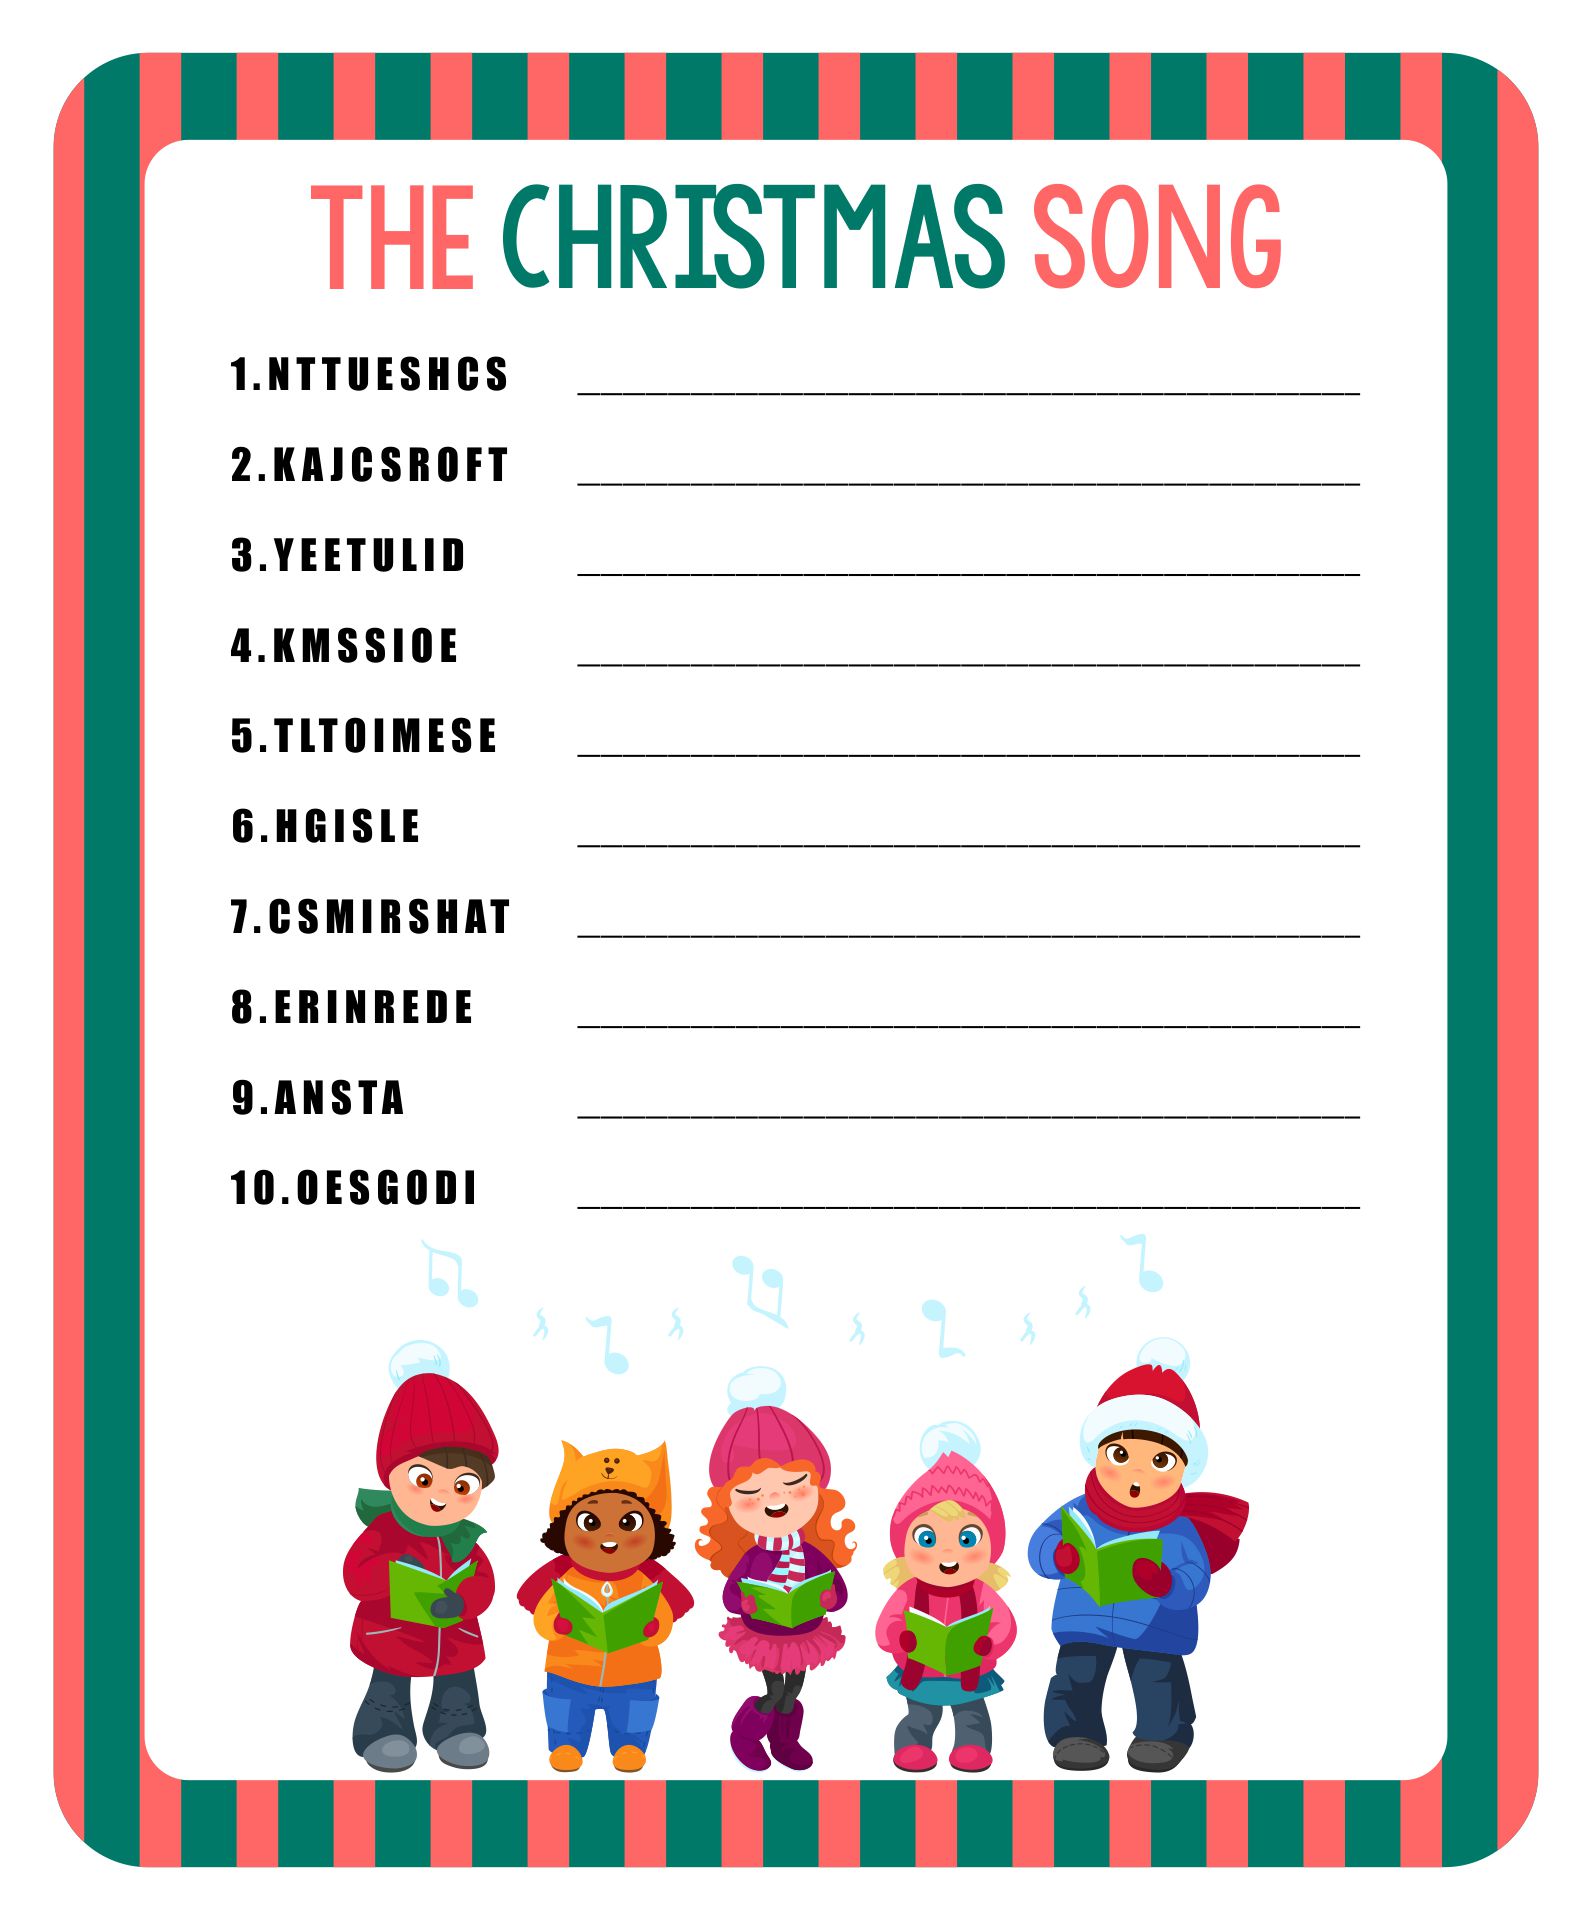 6-best-images-of-printable-christmas-song-scramble-2-christmas-song